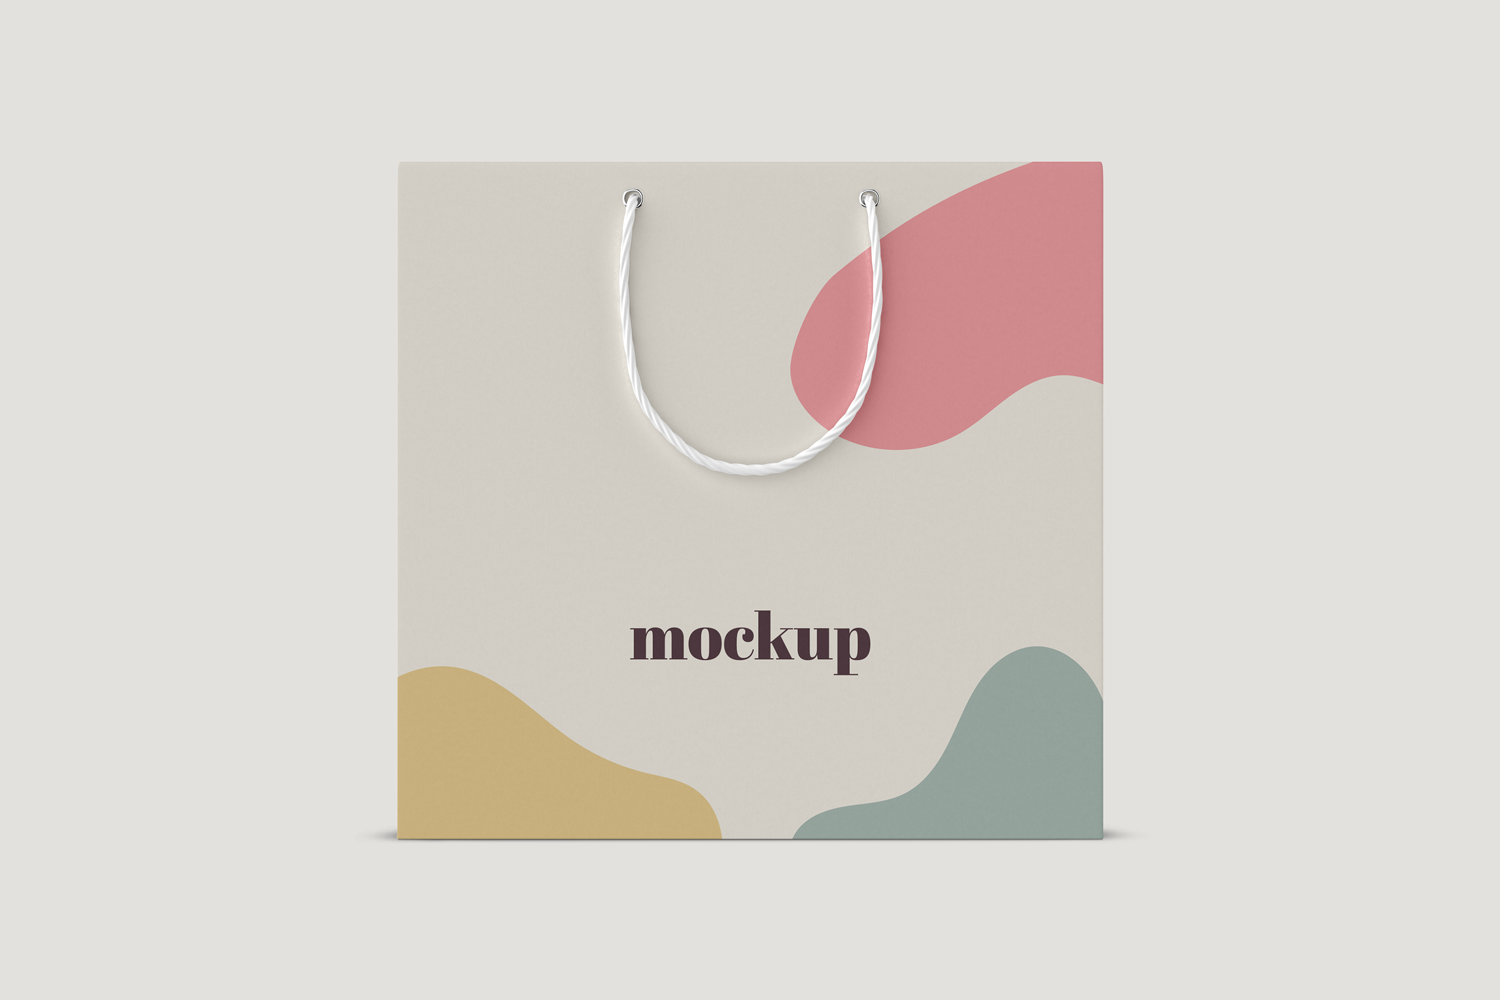 PSD mockup of two shopping bags for designers.
